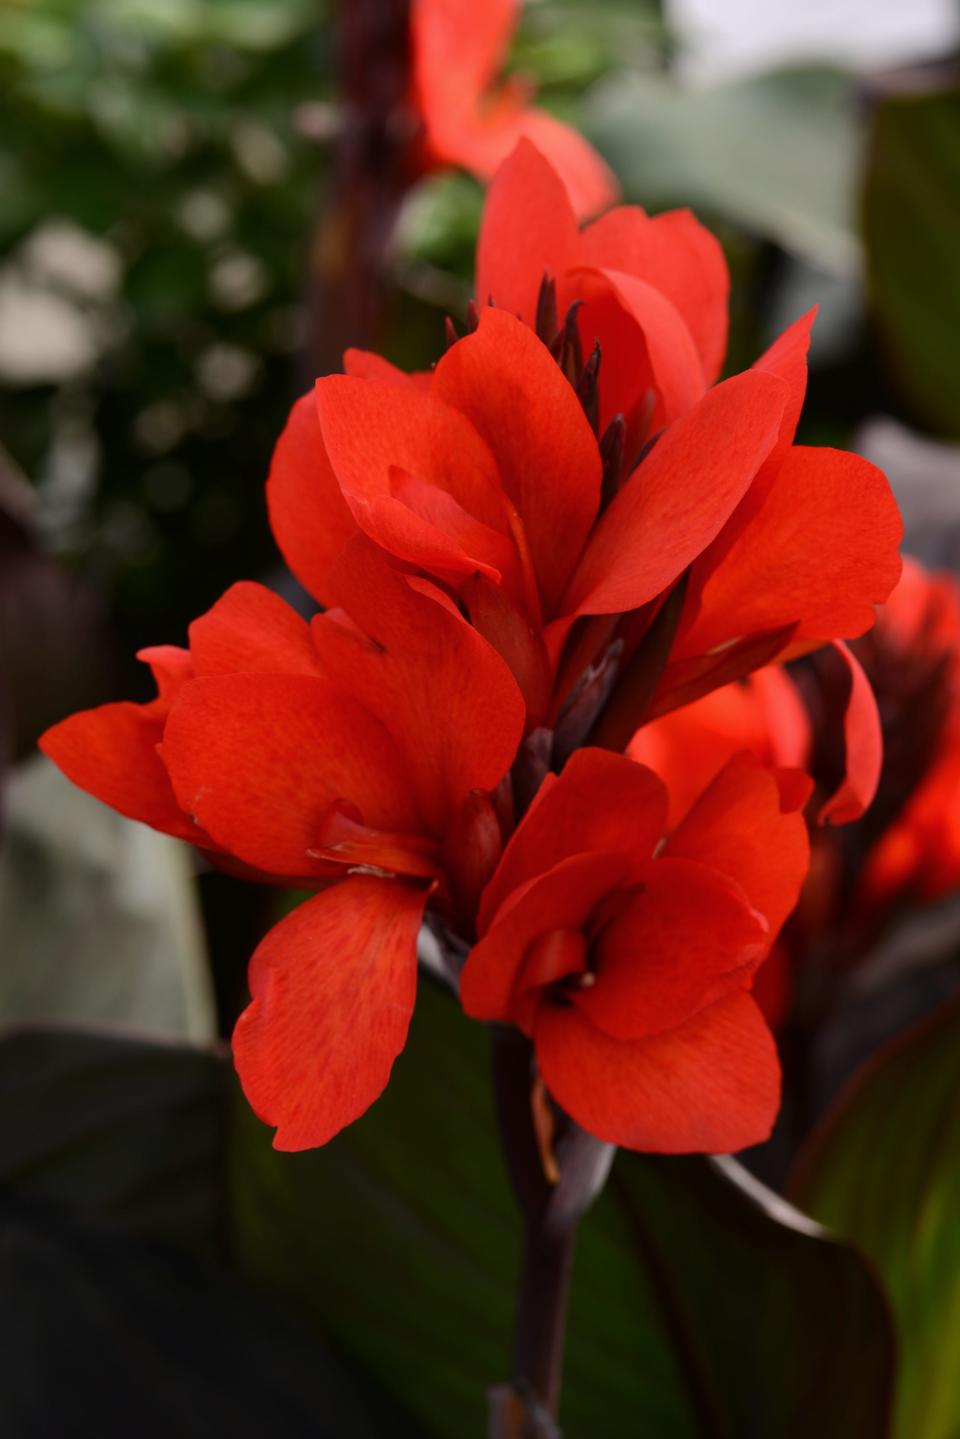 Cannova Bronze Scarlet canna blooms earlier than other cannas, sporting showy flowers and ornamental foliage from May through October.